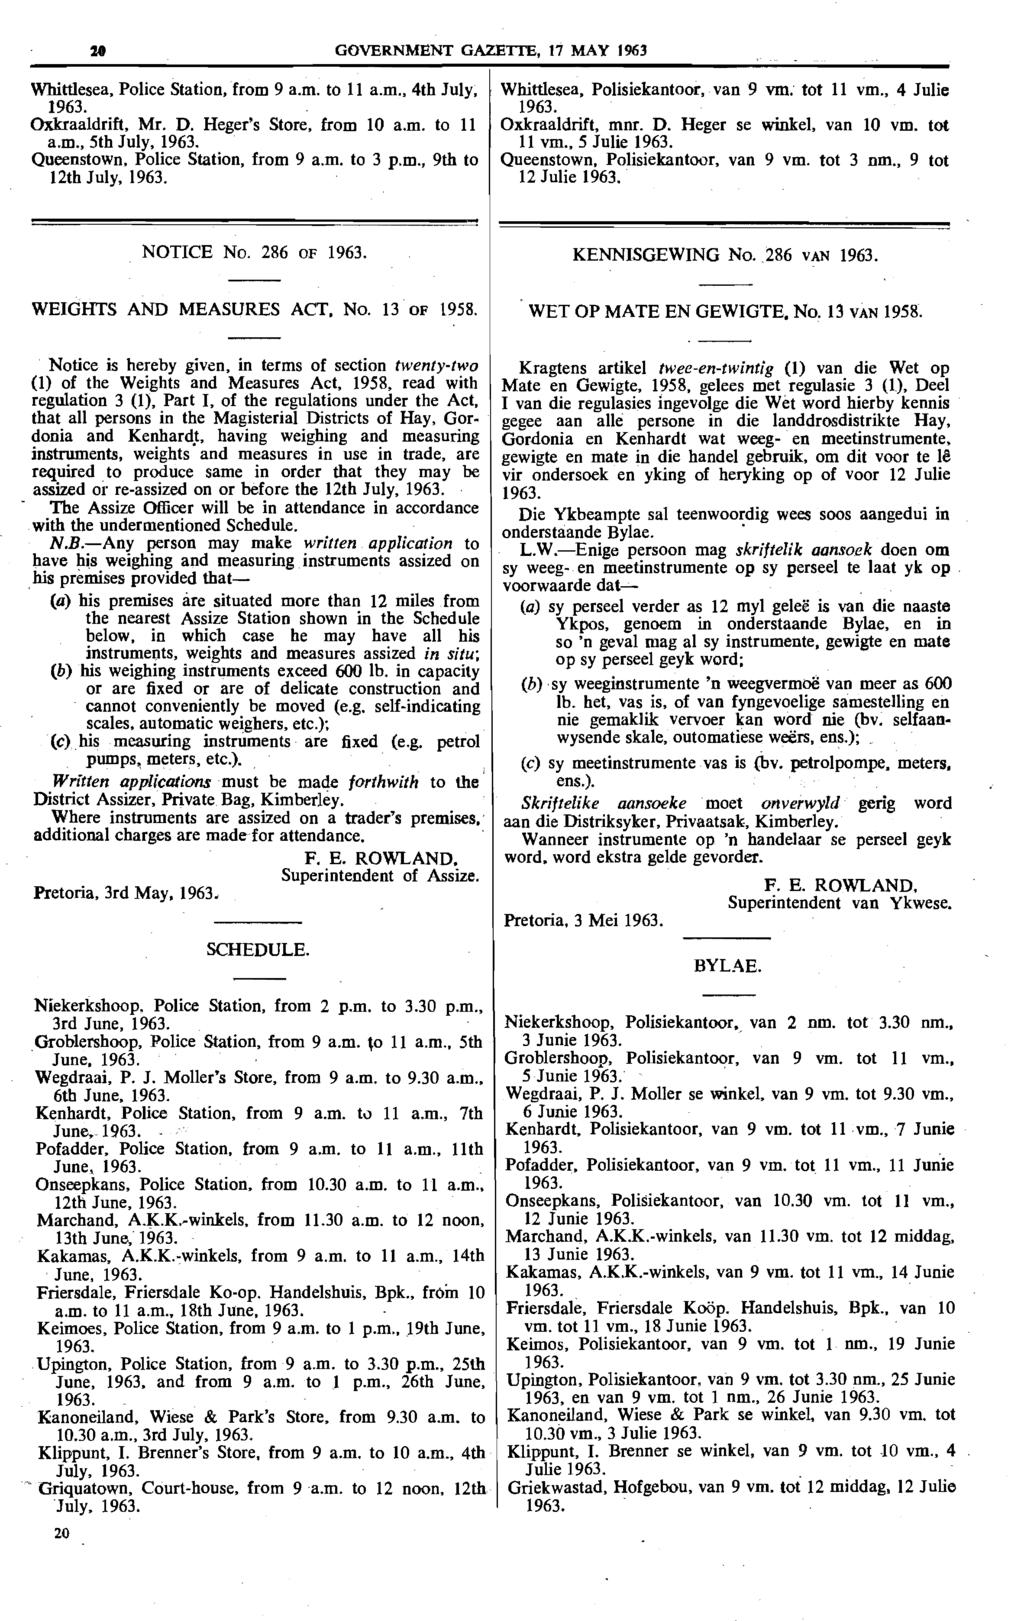 GOVERNMENT GAZETTE, 17 MAY 1963 WhittIesea, Police Station, from 9 a.m. to 11 a.m., 4th July; 1963. Oxkraaldrift, Mr. D. Heger's Store, from 10 a.m. to 11 a.m., 5th July, 1963.. Queenstown.